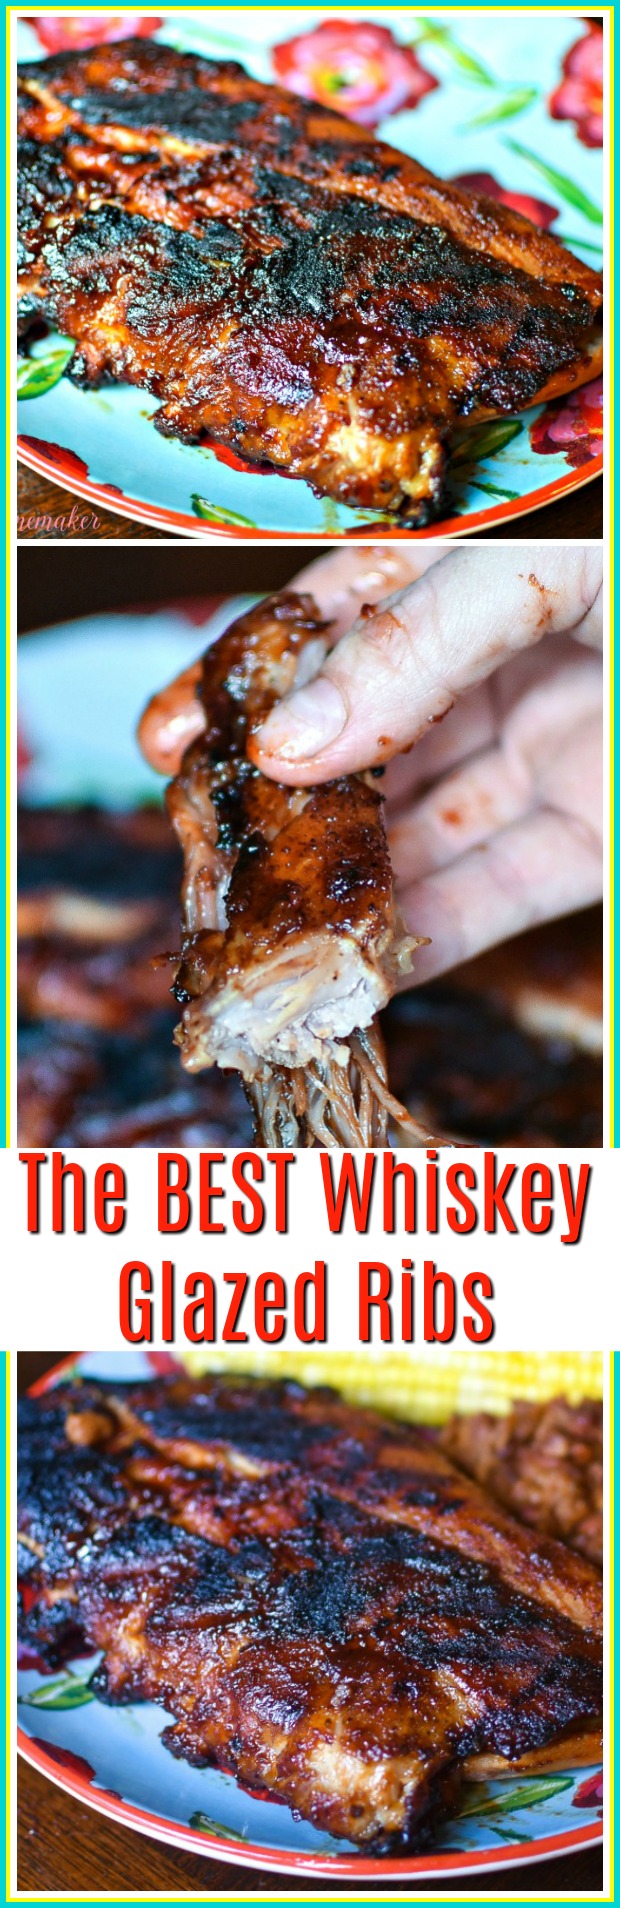 The BEST Whiskey Glazed Ribs on a plate with baked beans and corn on the cob | MrsHappyHomemaker.com